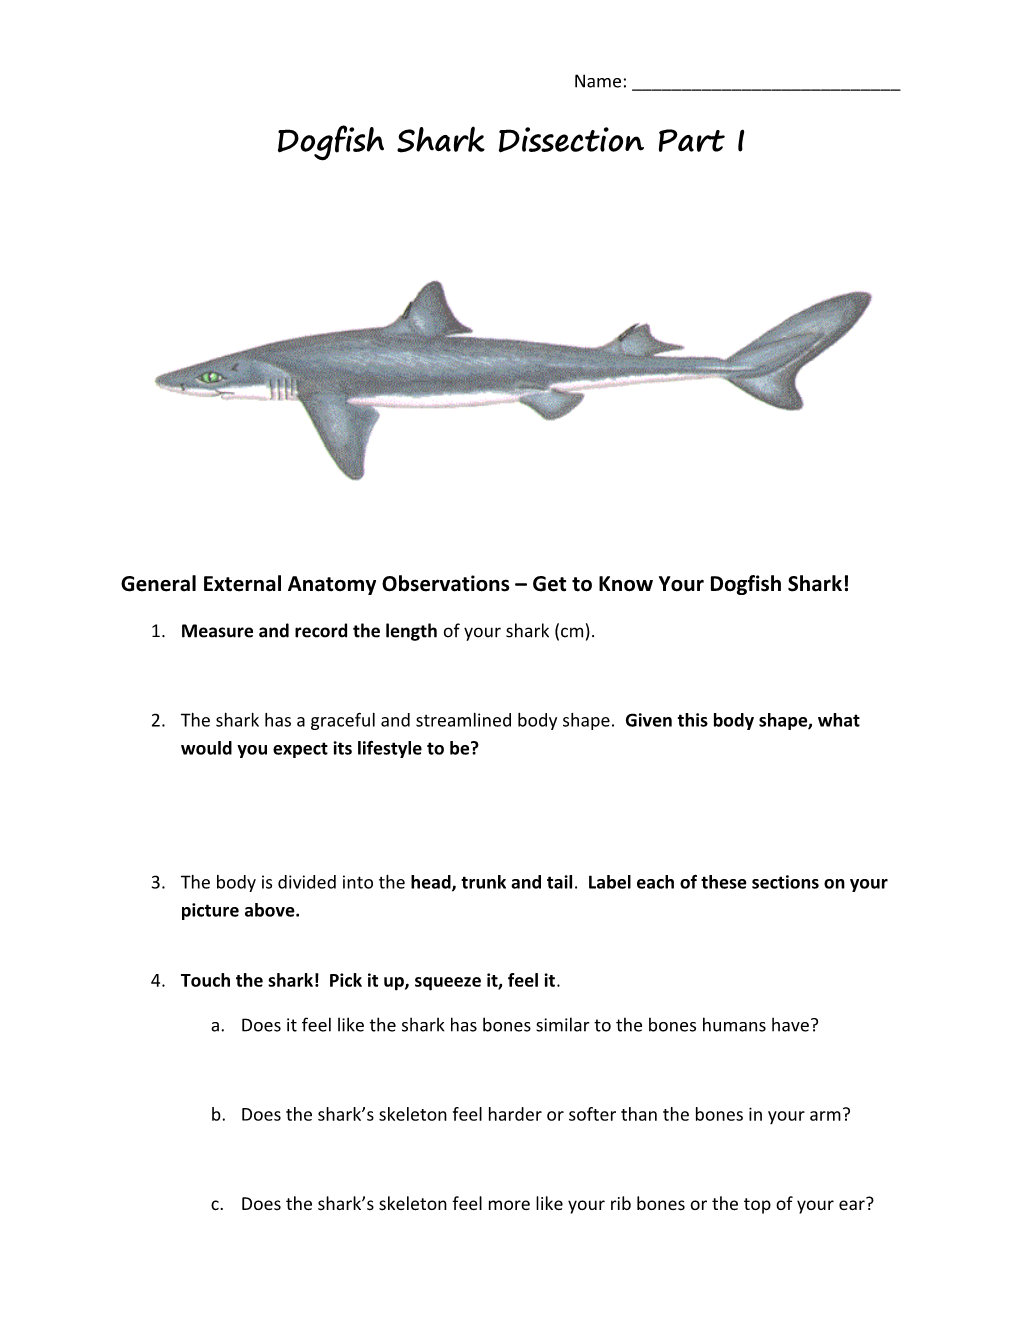 Dogfish Shark Dissection Part I